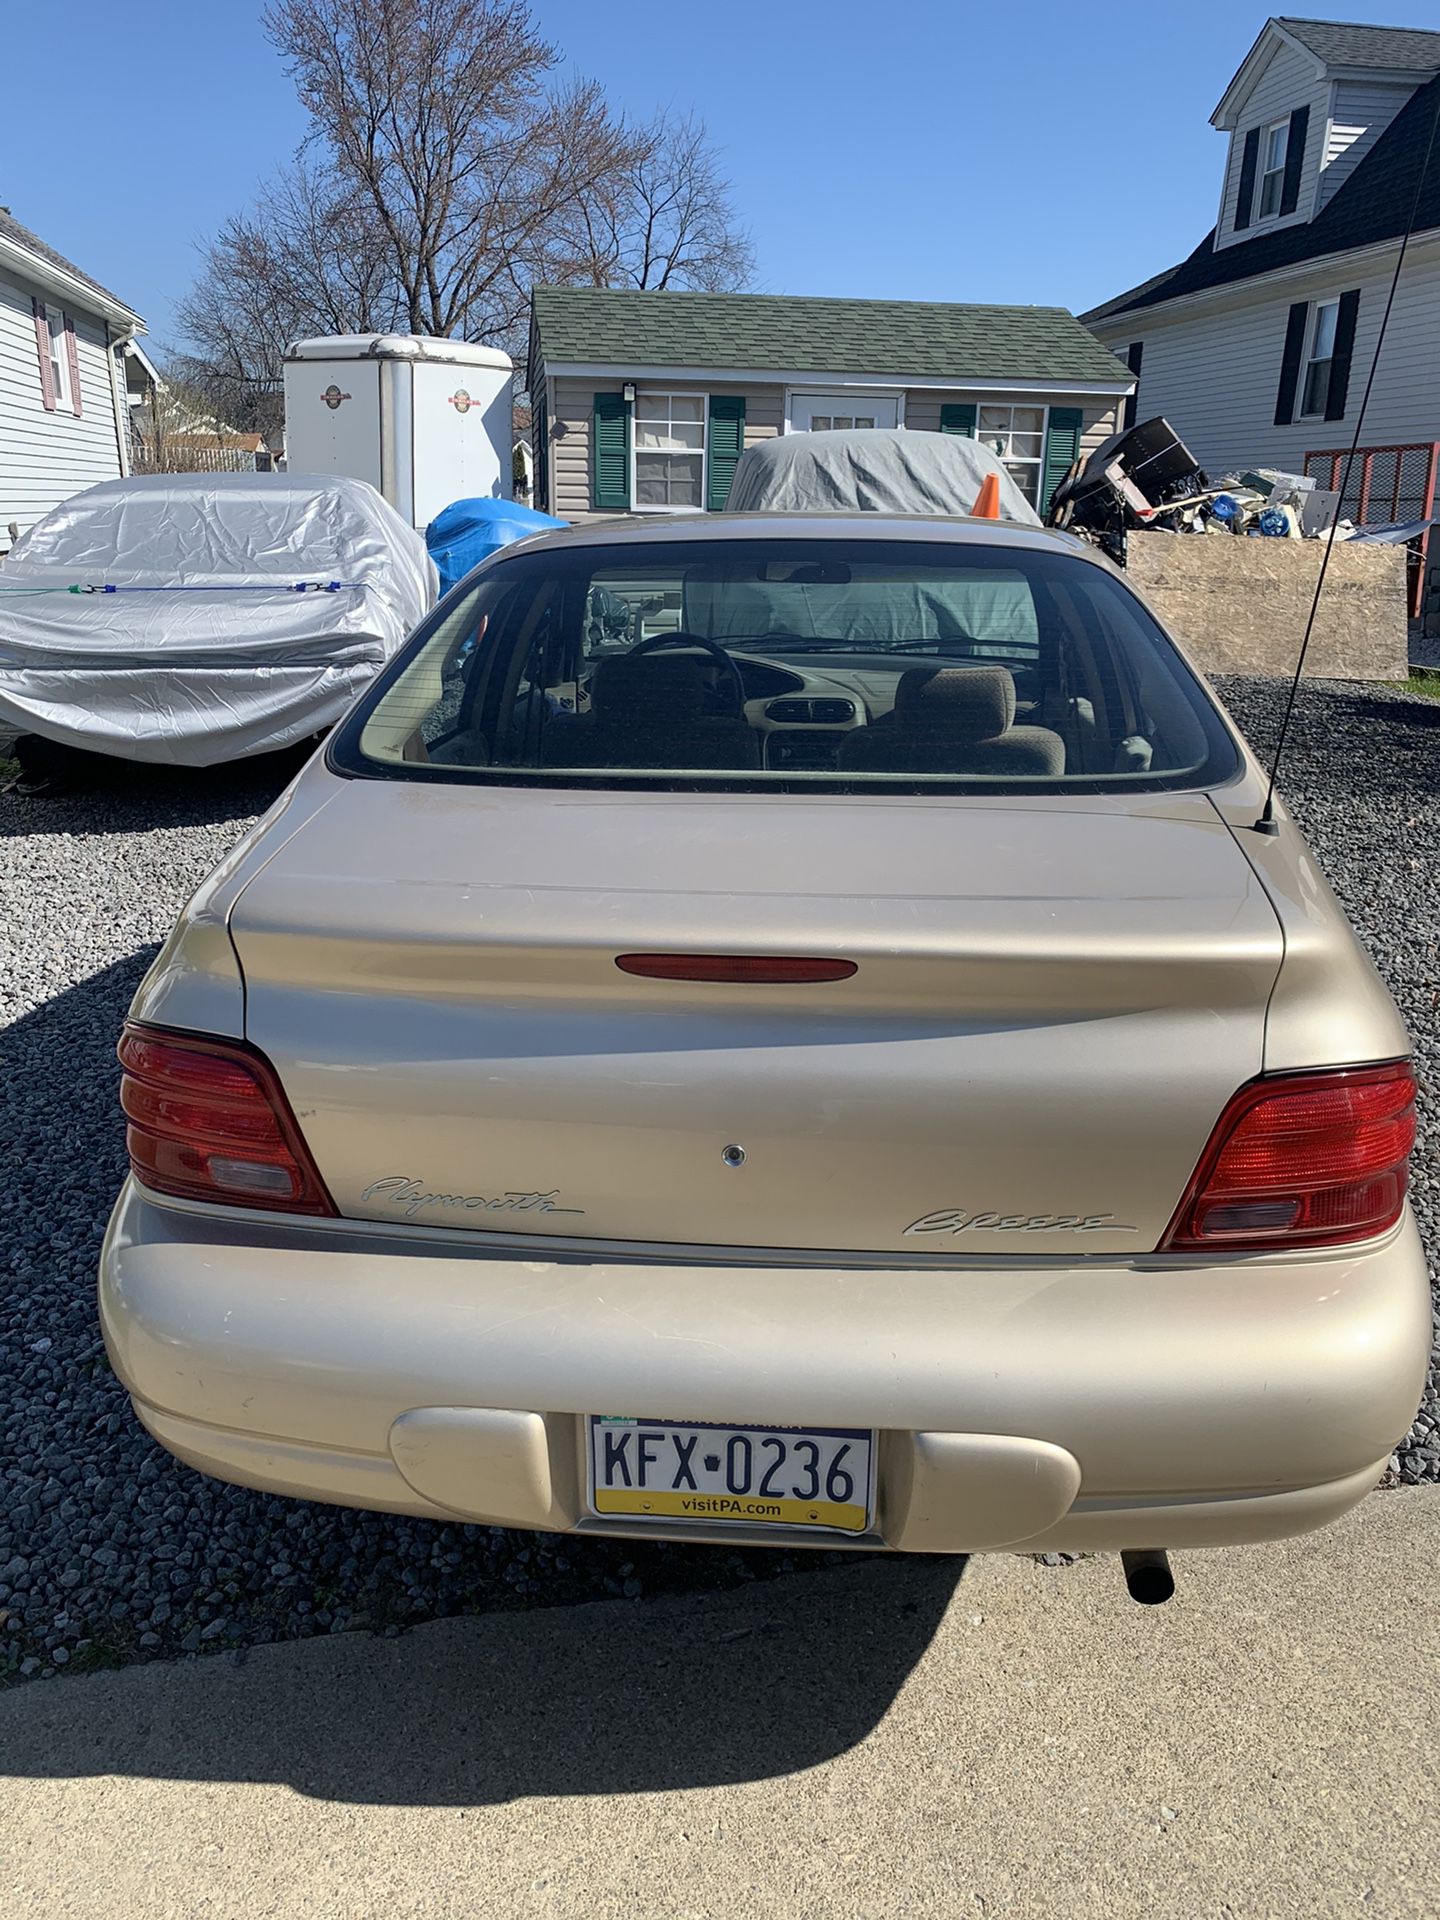 1998 Plymouth Breeze